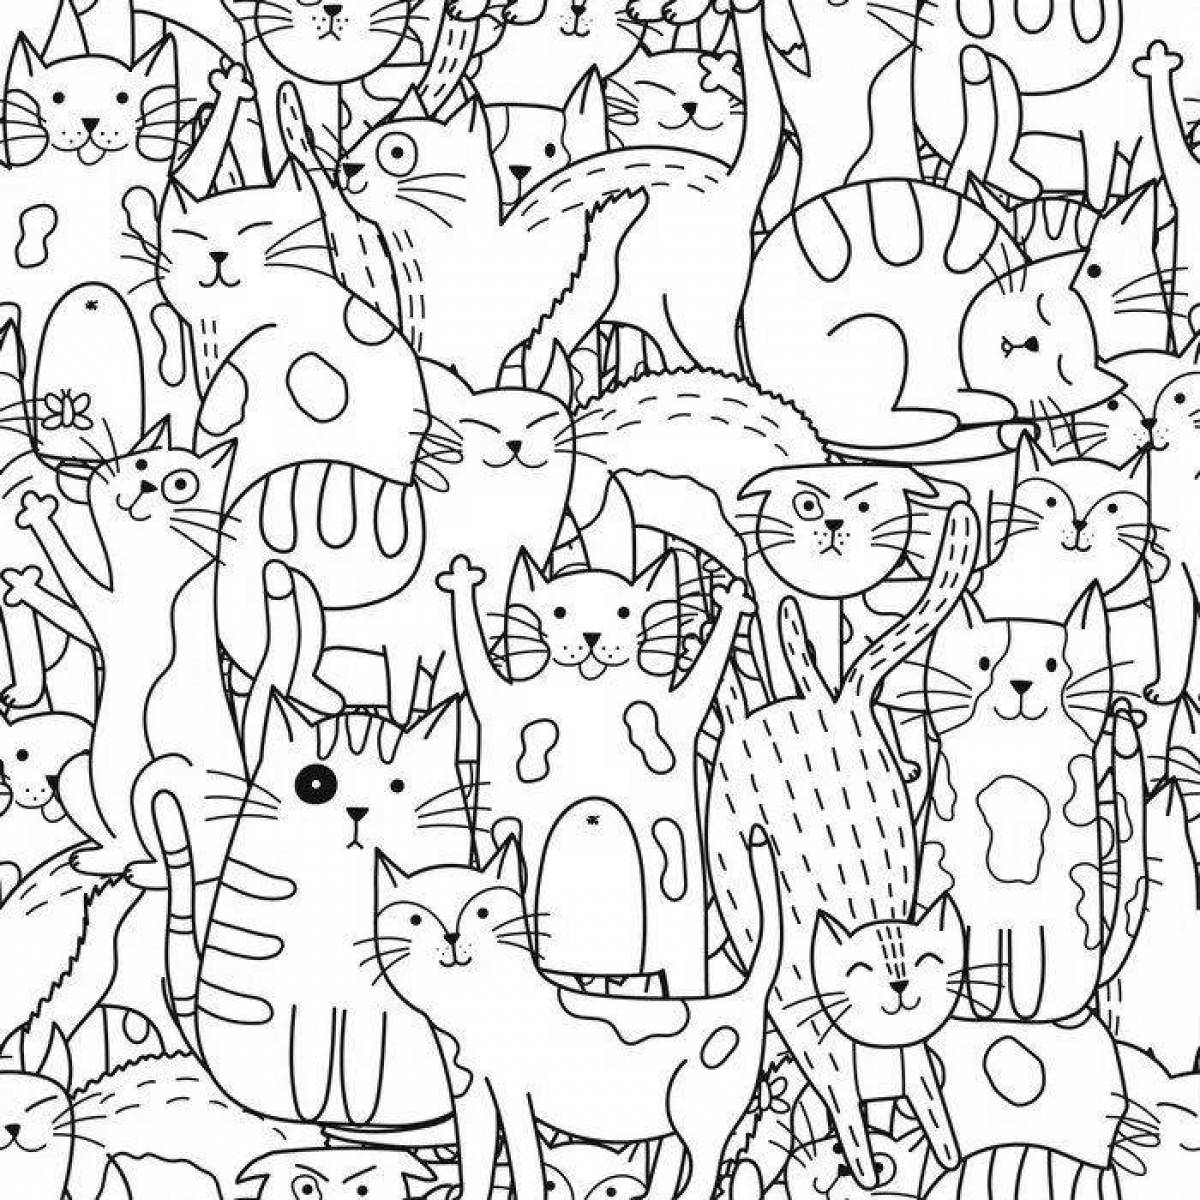 Endless charming coloring book